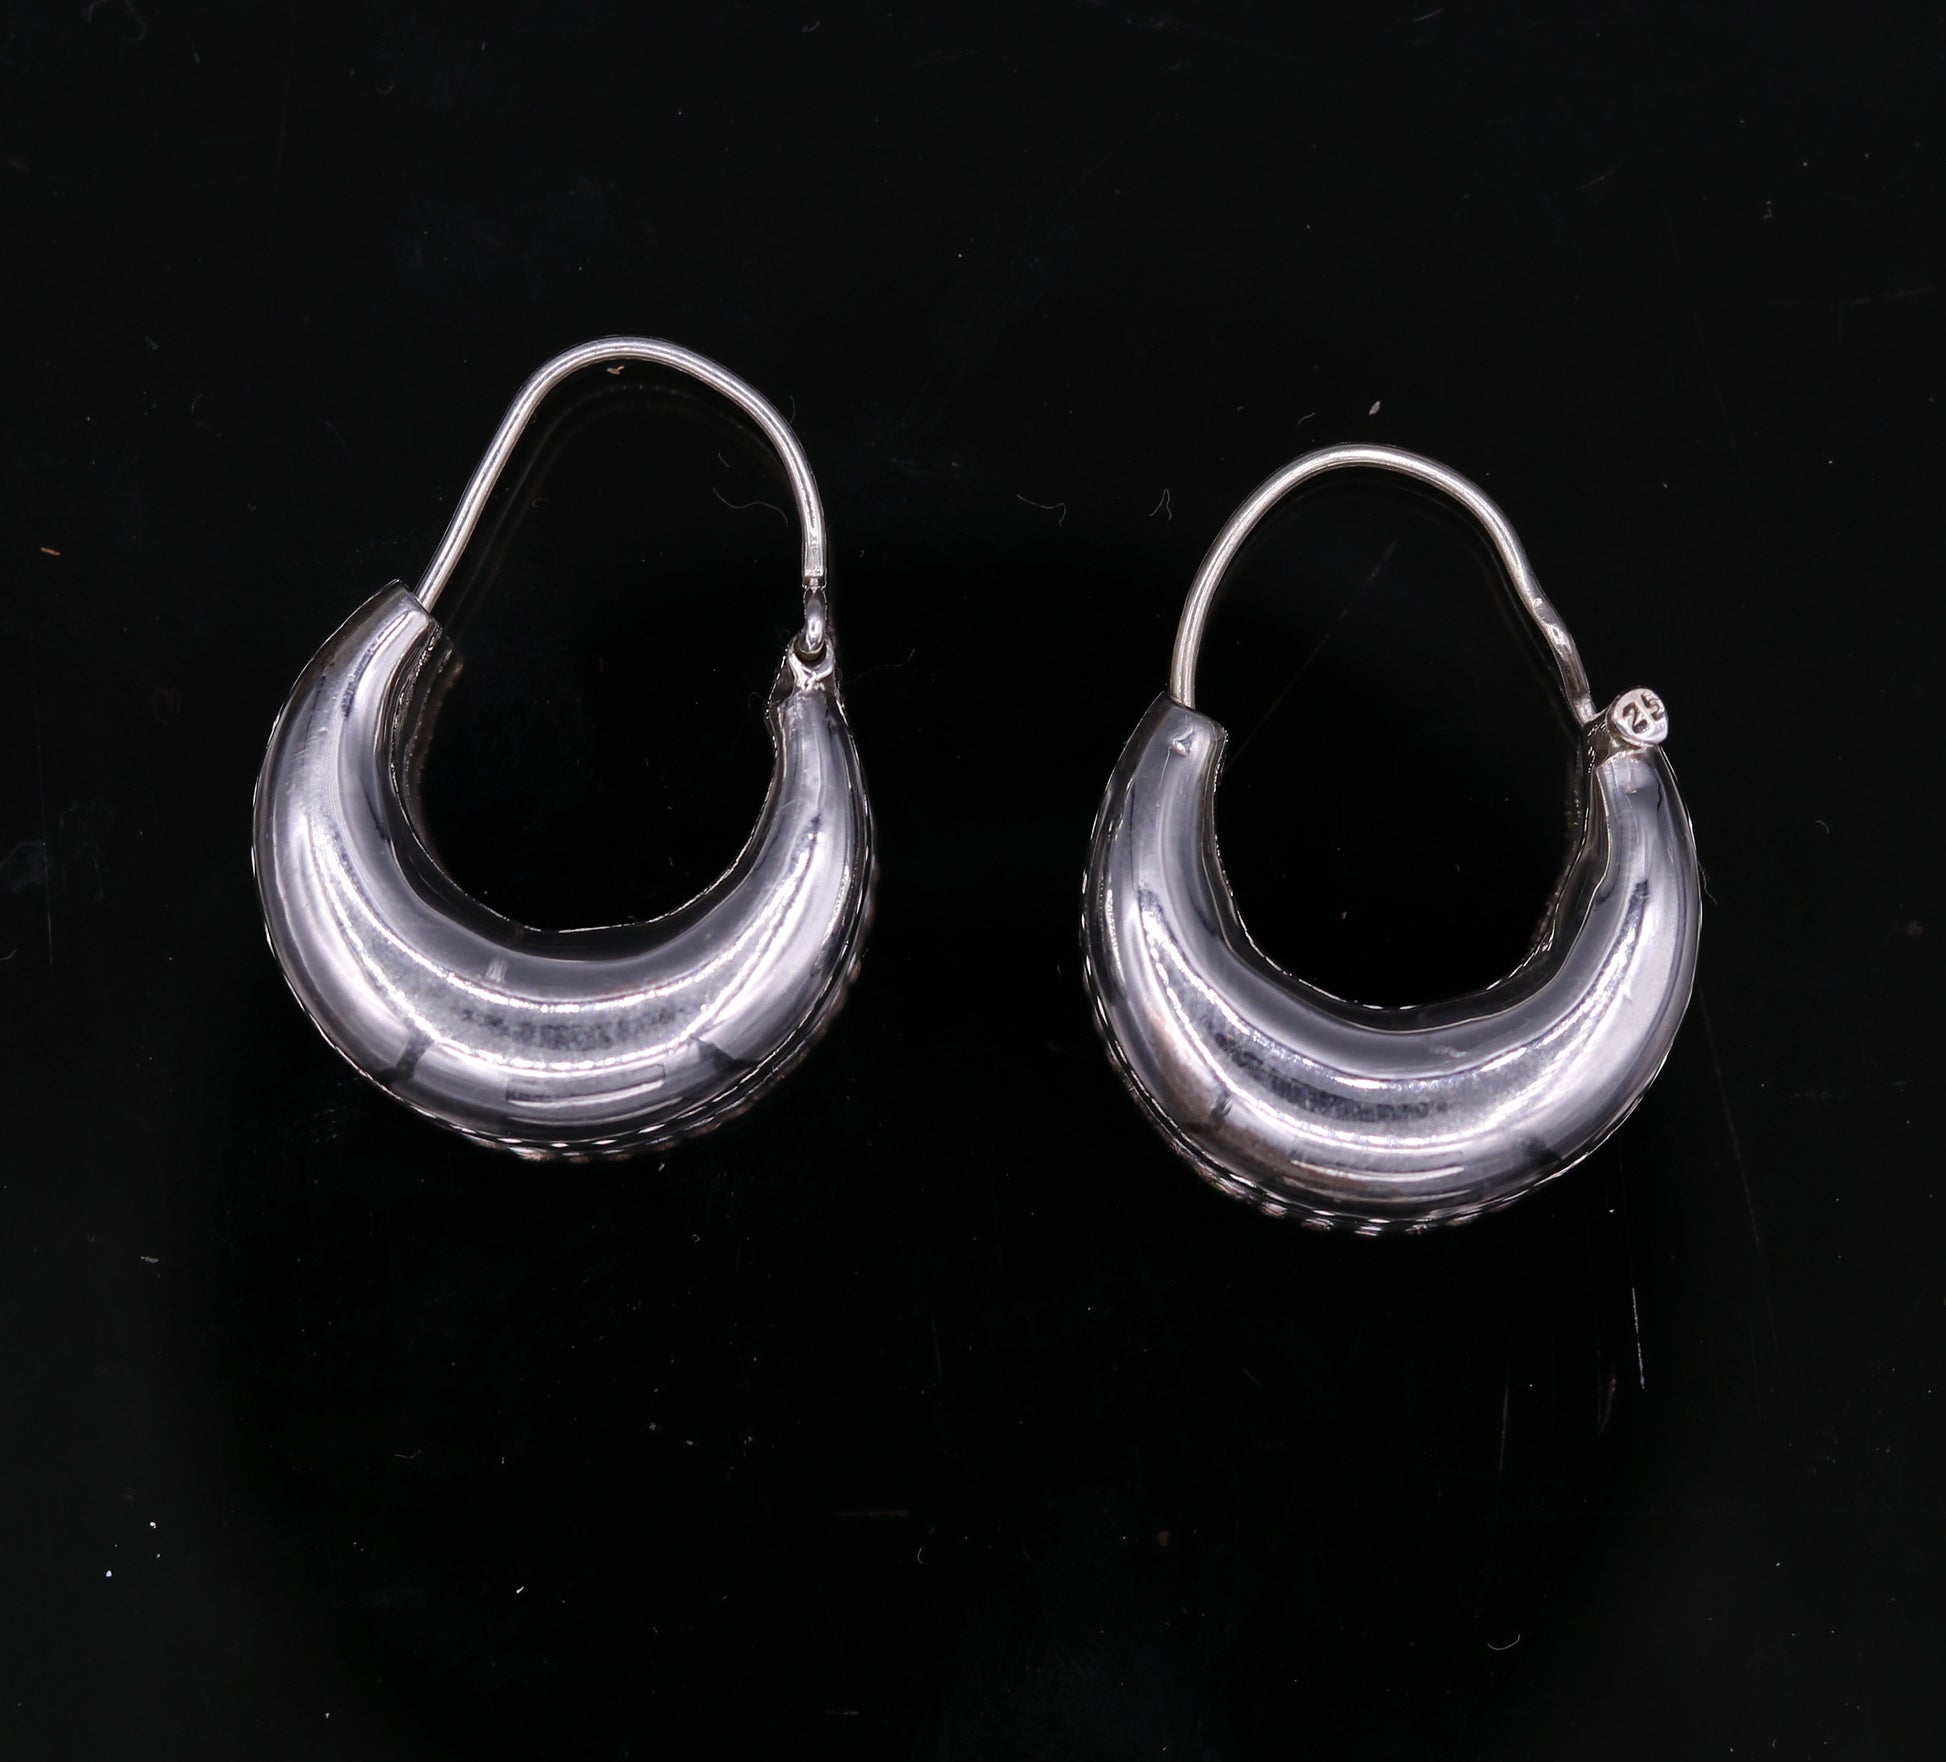 Indian traditional style 925 sterling pure silver handmade vintage style hoops earrings kundal, ethnic bali tribal jewelry from india s588 - TRIBAL ORNAMENTS